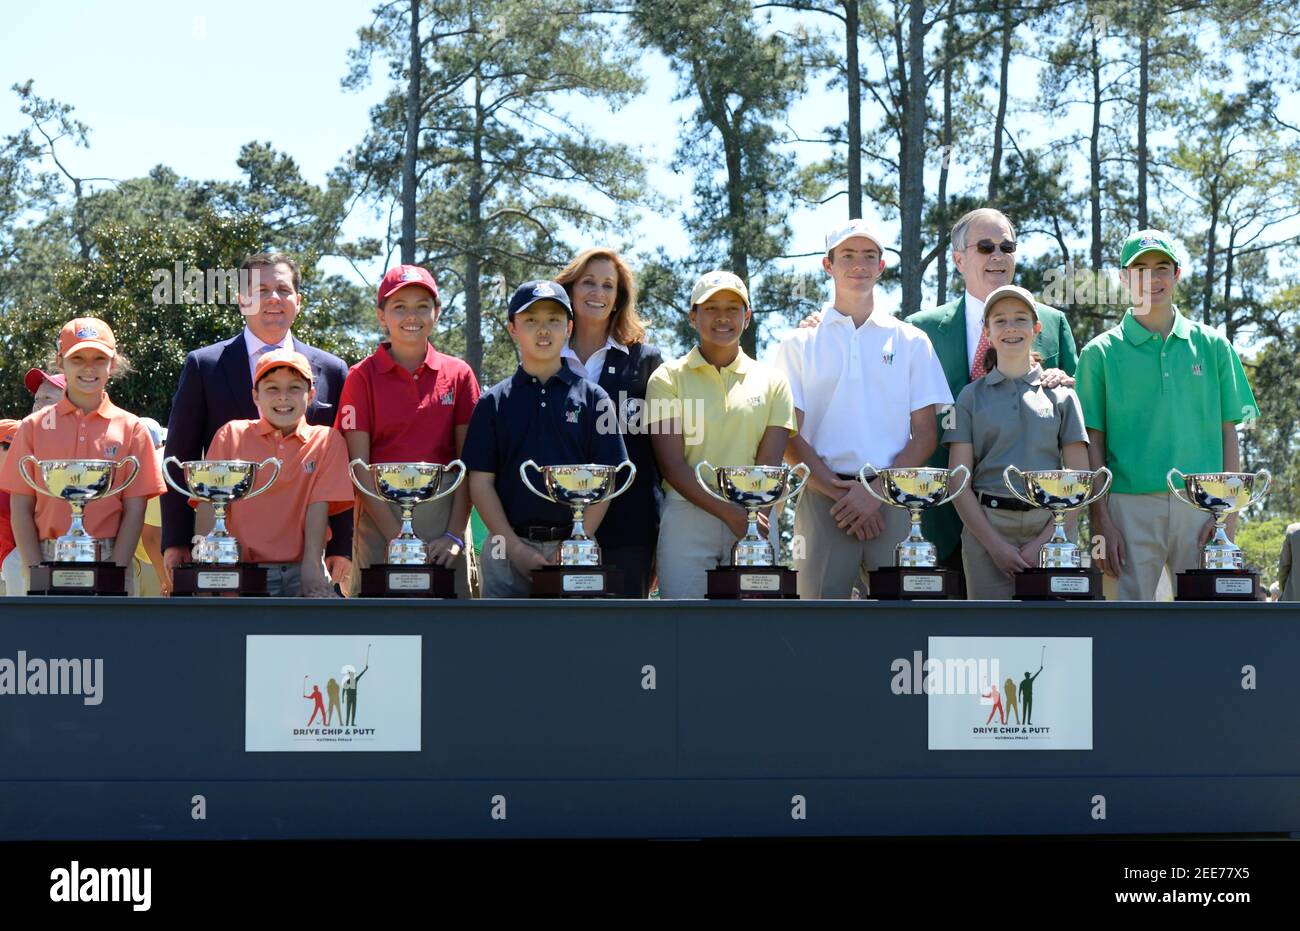 Apr 3, 2016; Augusta, GA, USA; The eight age-group winners at the 2016 Drive, Chip and Putt Championship at Augusta National GC. From Left in front row they are Emerson Blair and Stephen Robert Hernandez in the 7-9 year olds. Alexa Pano and Christian Kim in the 10-11 year olds. Kayla Sam and Ty Griggs in the 12-13 year olds. Alyssa Montgomery and Michael Thorbjornsen won the 14-15 year olds.  Mandatory Credit: Michael Madrid -USA TODAY Sports  / Reuters  Picture Supplied by Action Images *** Local Caption *** 2016-04-03T180907Z 1719735945 NOCID RTRMADP 3 PGA-DRIVE-CHIP-AND-PUTT-CHAMPIONSHIP.JP Stock Photo